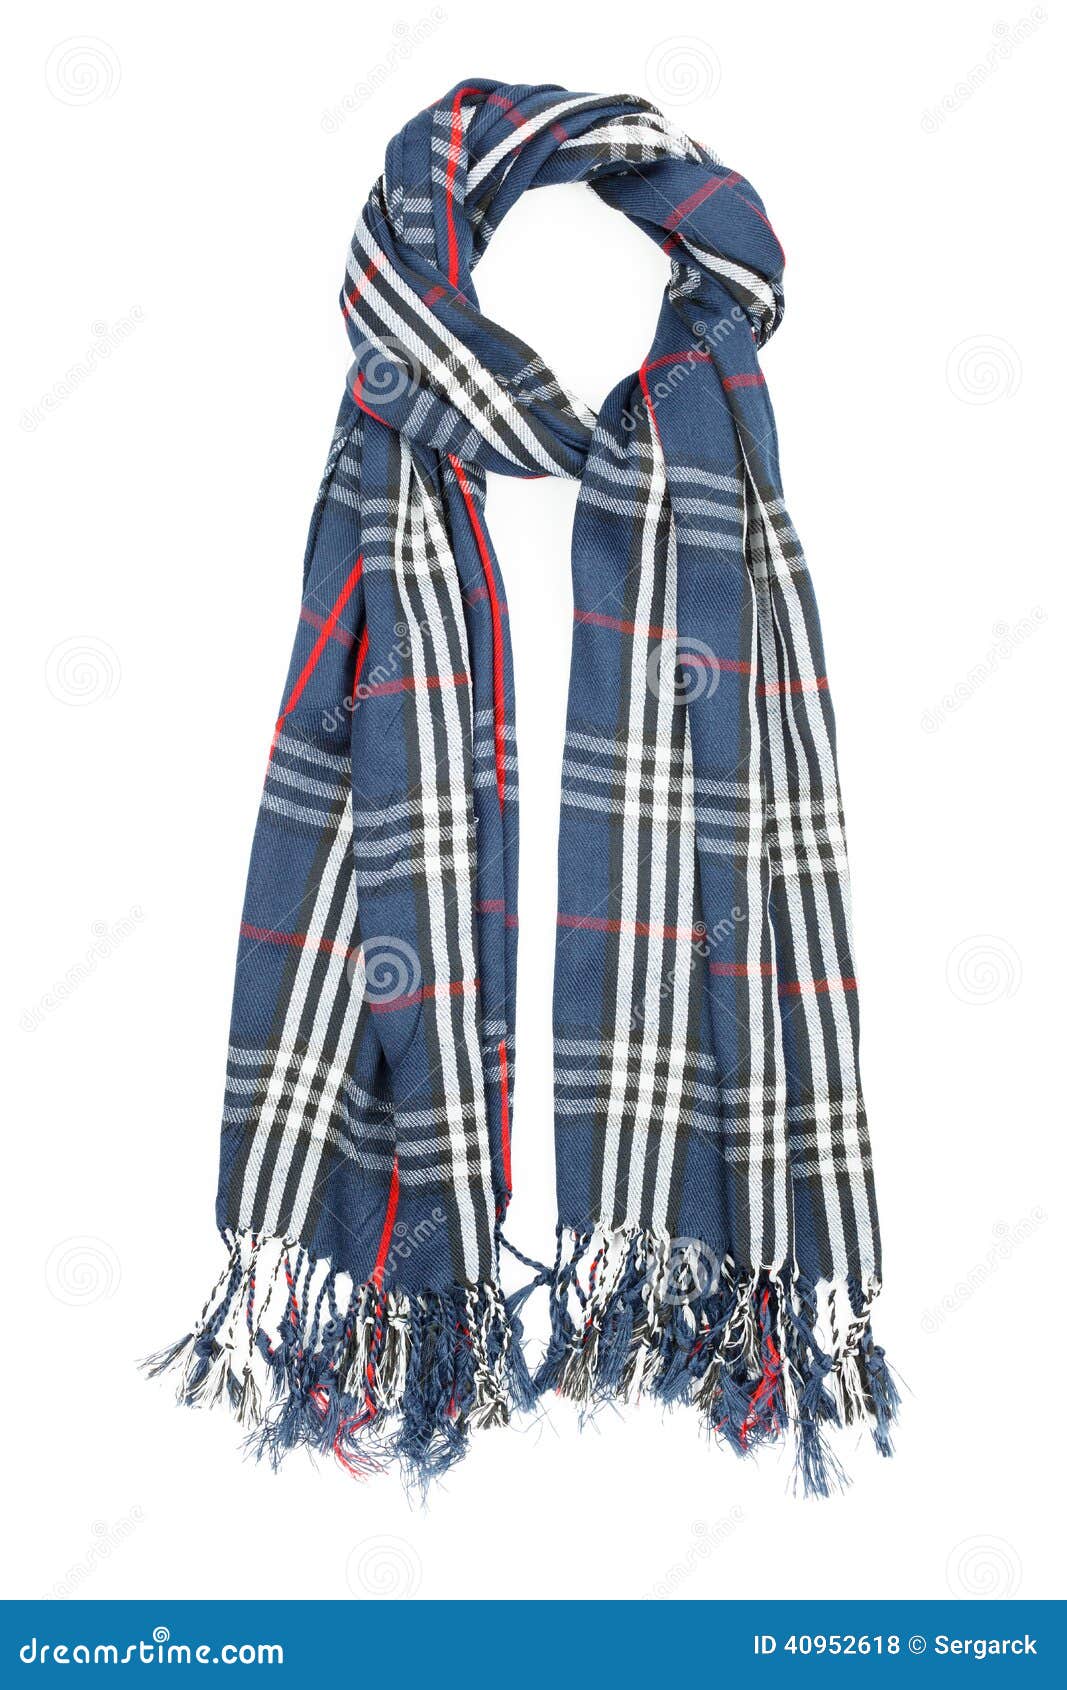 a scarf is woolen in a blue cage with red filaments and fringe,  on a white background